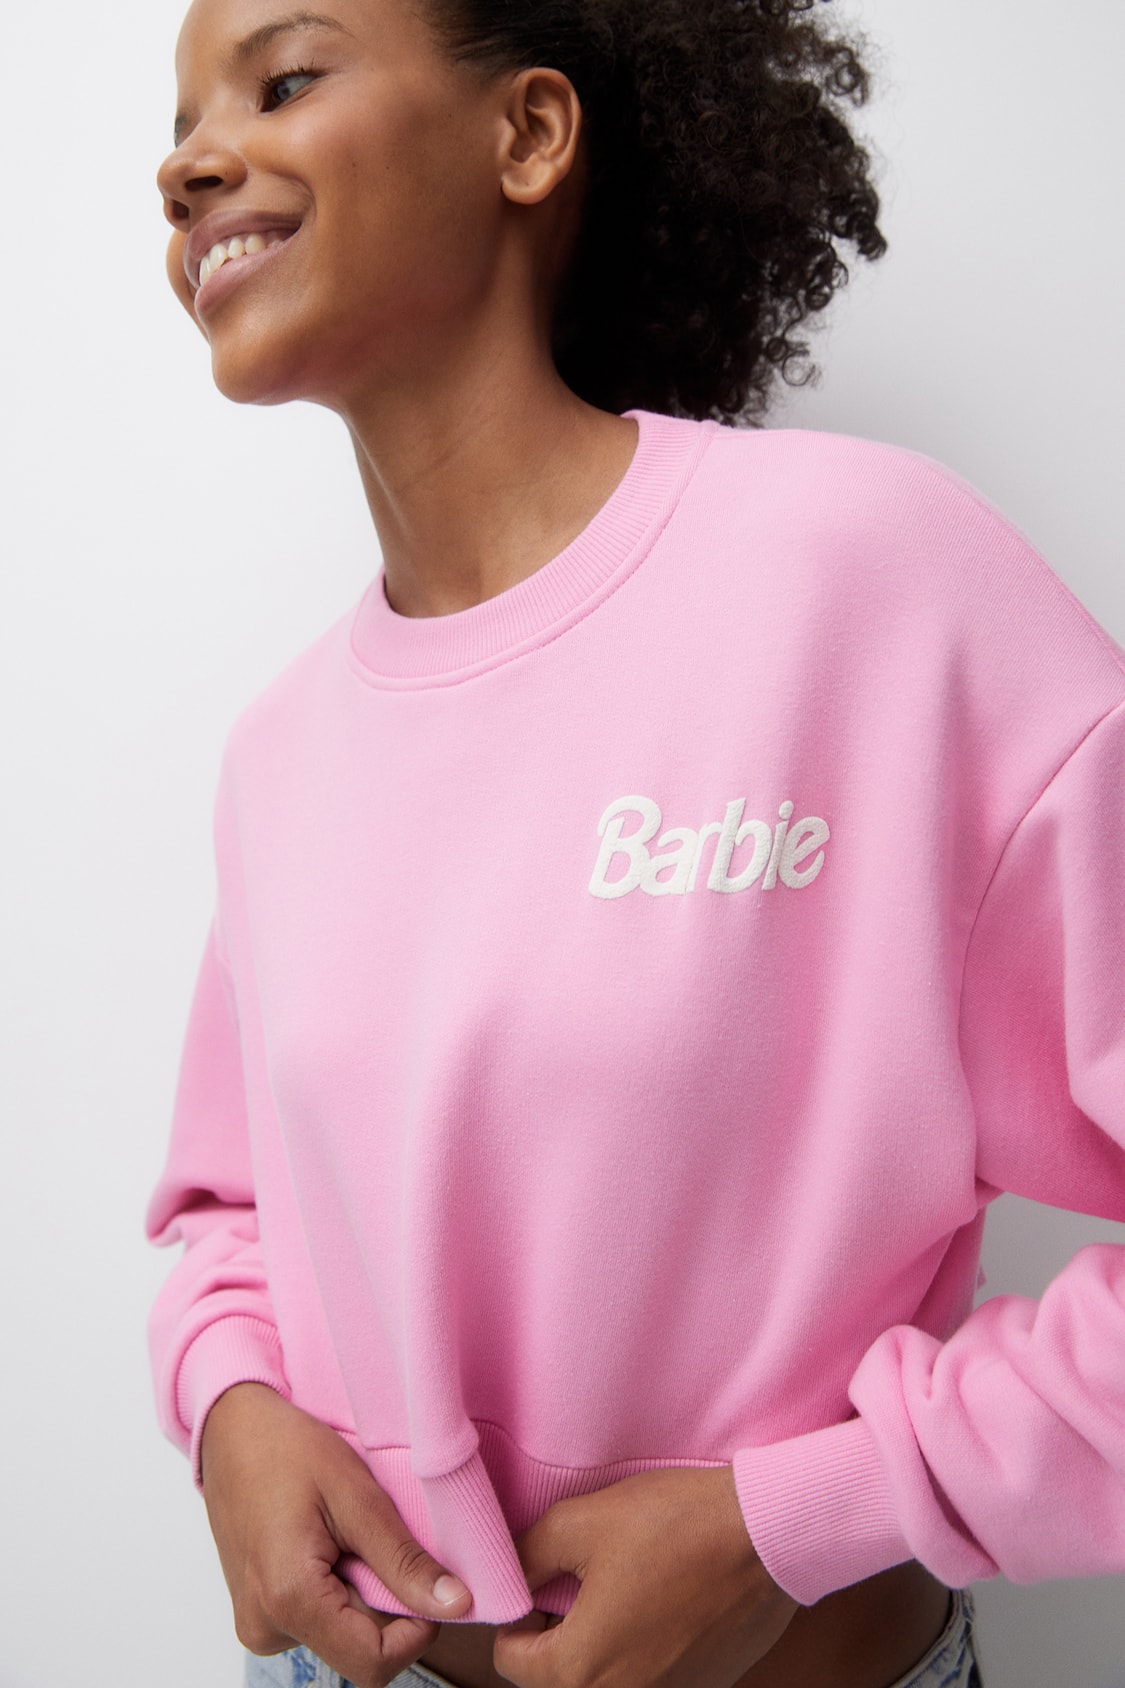 How to Make a Barbie Cropped Sweatshirt with Adidas Branding 